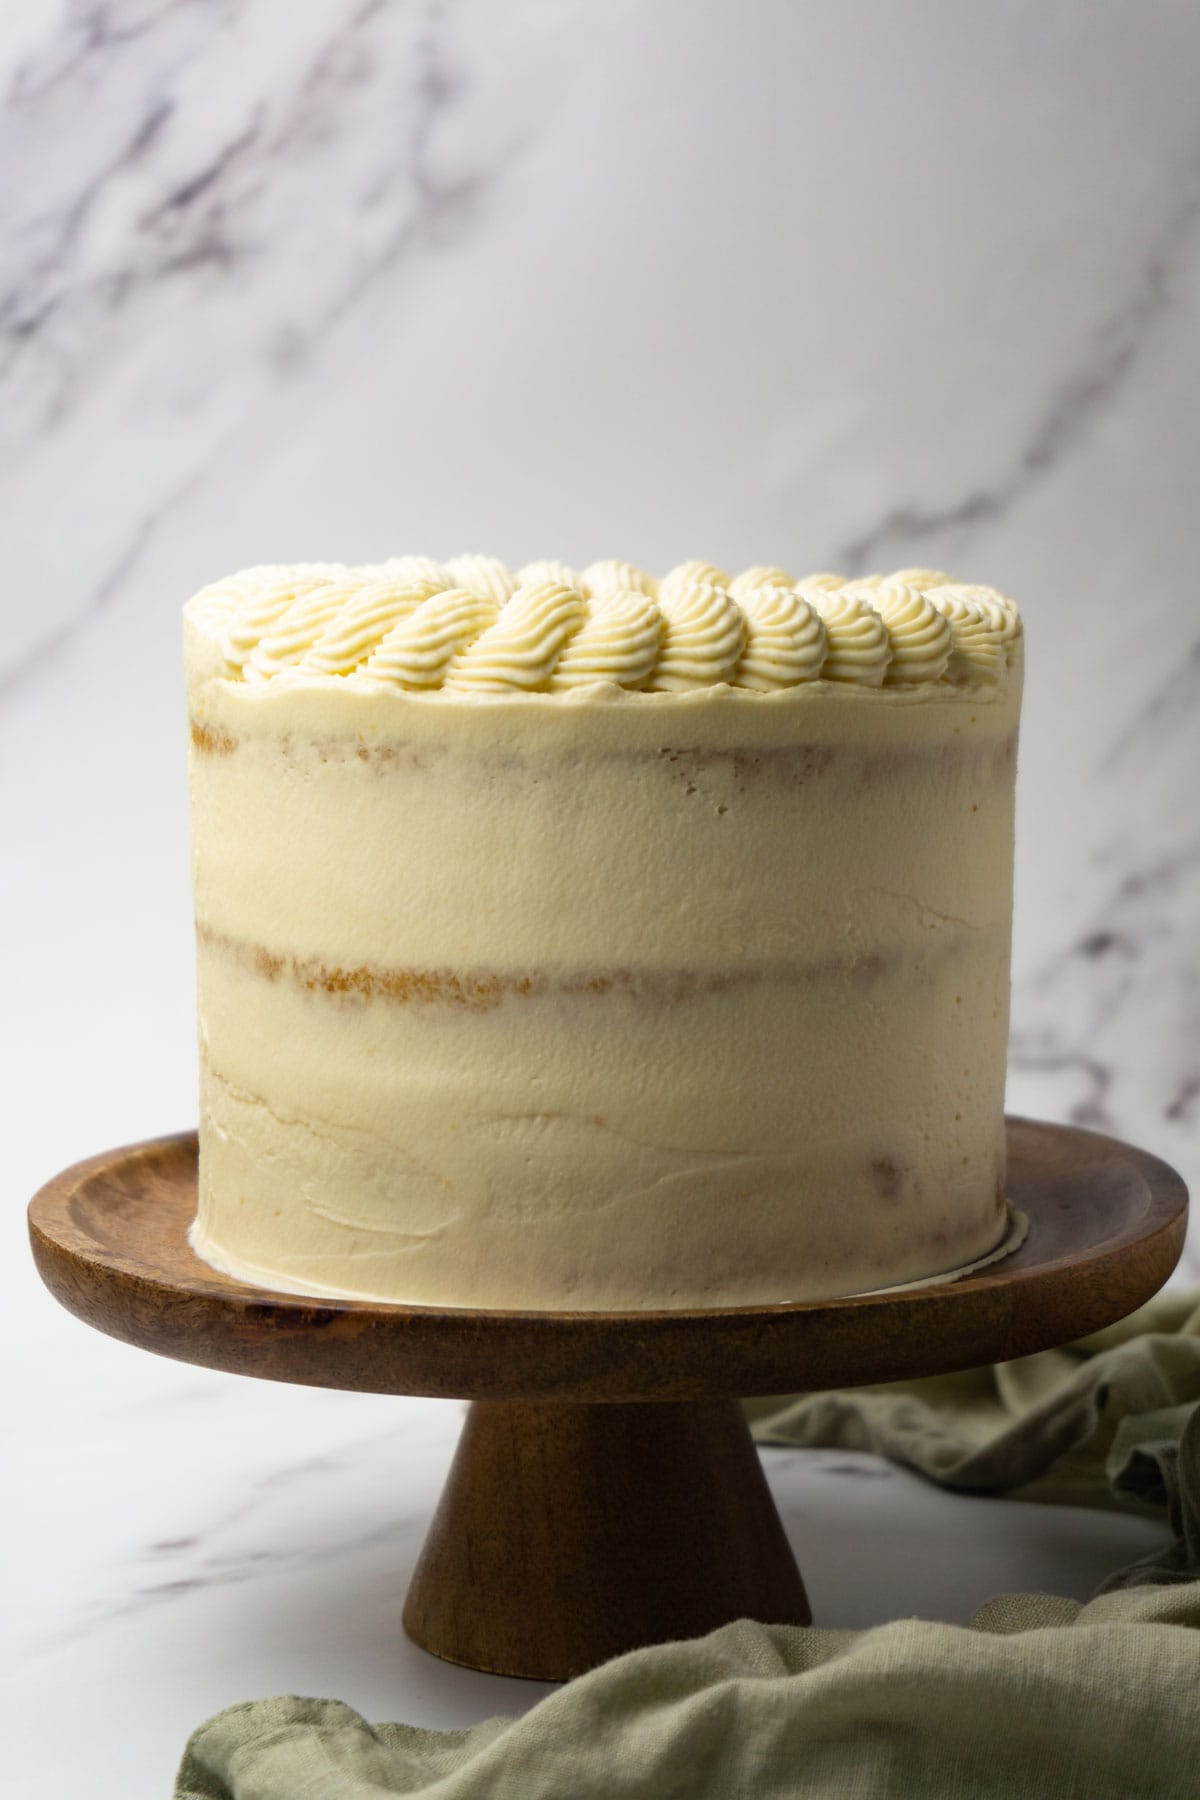 Semi-naked cake with caramel frosting on a wooden cake stand.